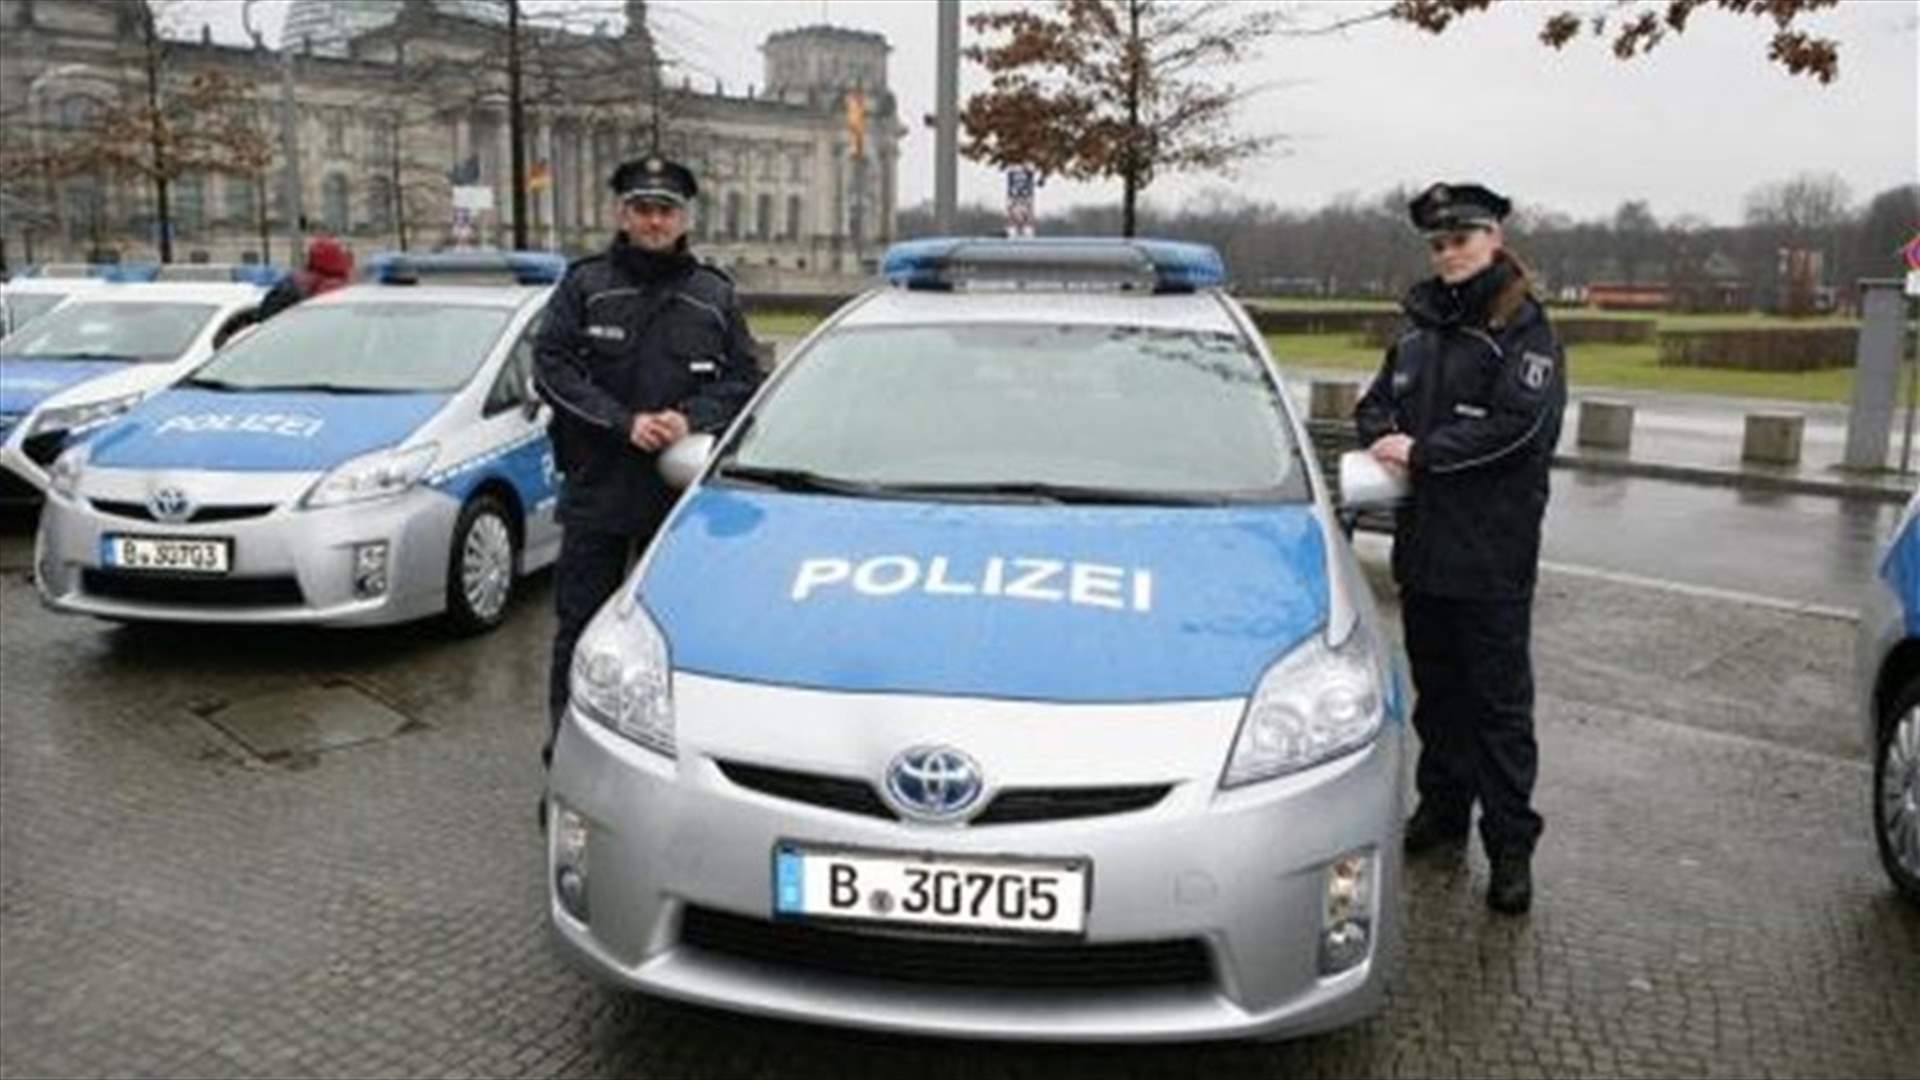 Syrian, Iraqi militants said to have planned New Year&#39;s attack in Germany